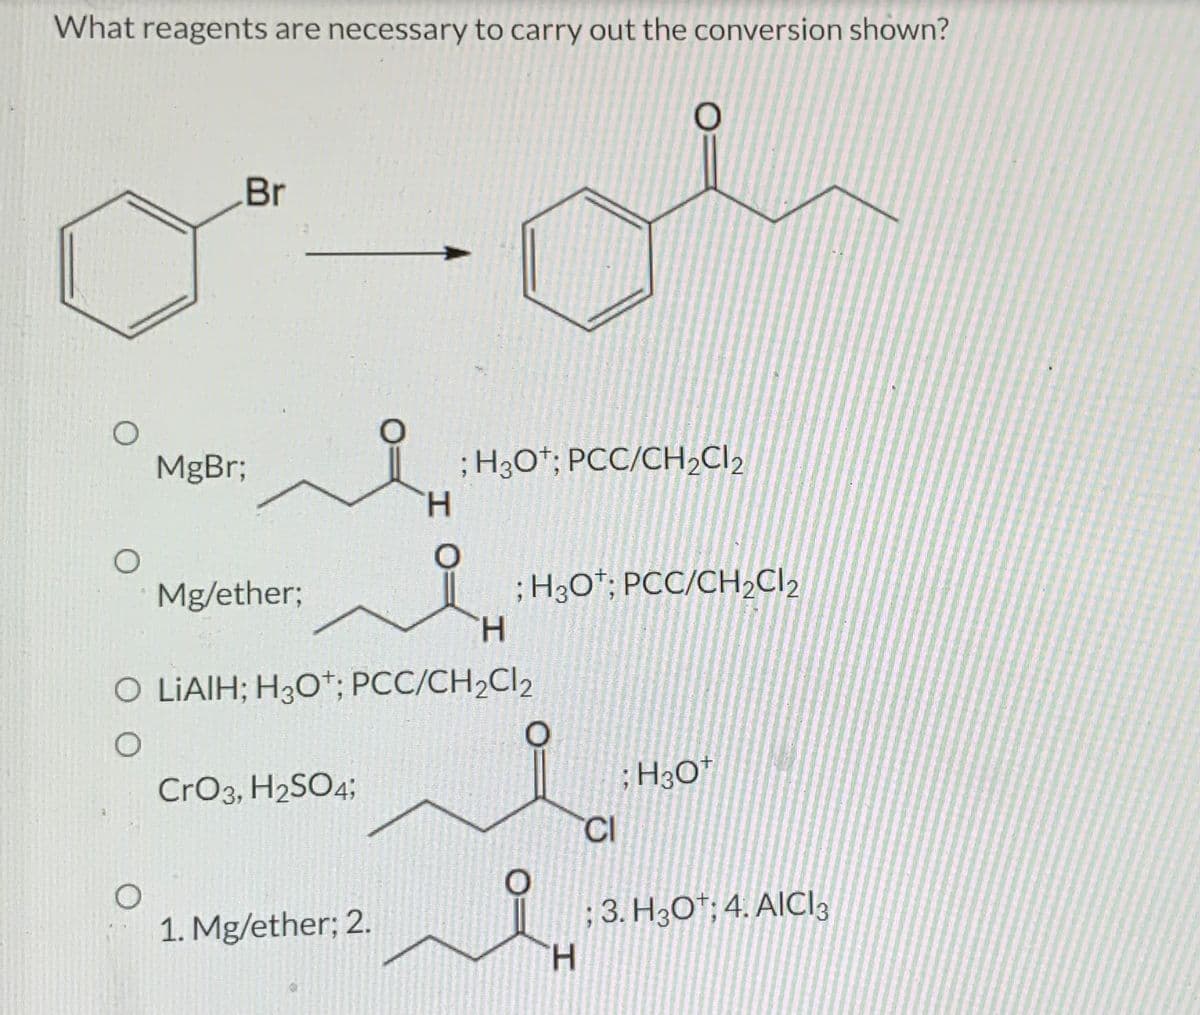 What reagents are necessary to carry out the conversion shown?
O
O
Br
O
MgBr;
Mg/ether;
CrO3, H₂SO4;
O
1. Mg/ether; 2.
H
O LIAIH; H3O+; PCC/CH₂Cl2
O
; H30¹; PCC/CH₂Cl₂
H
; H3O+; PCC/CH₂Cl₂
O
O
O
H
CI
; H3O+
; 3. H30; 4. AICI 3